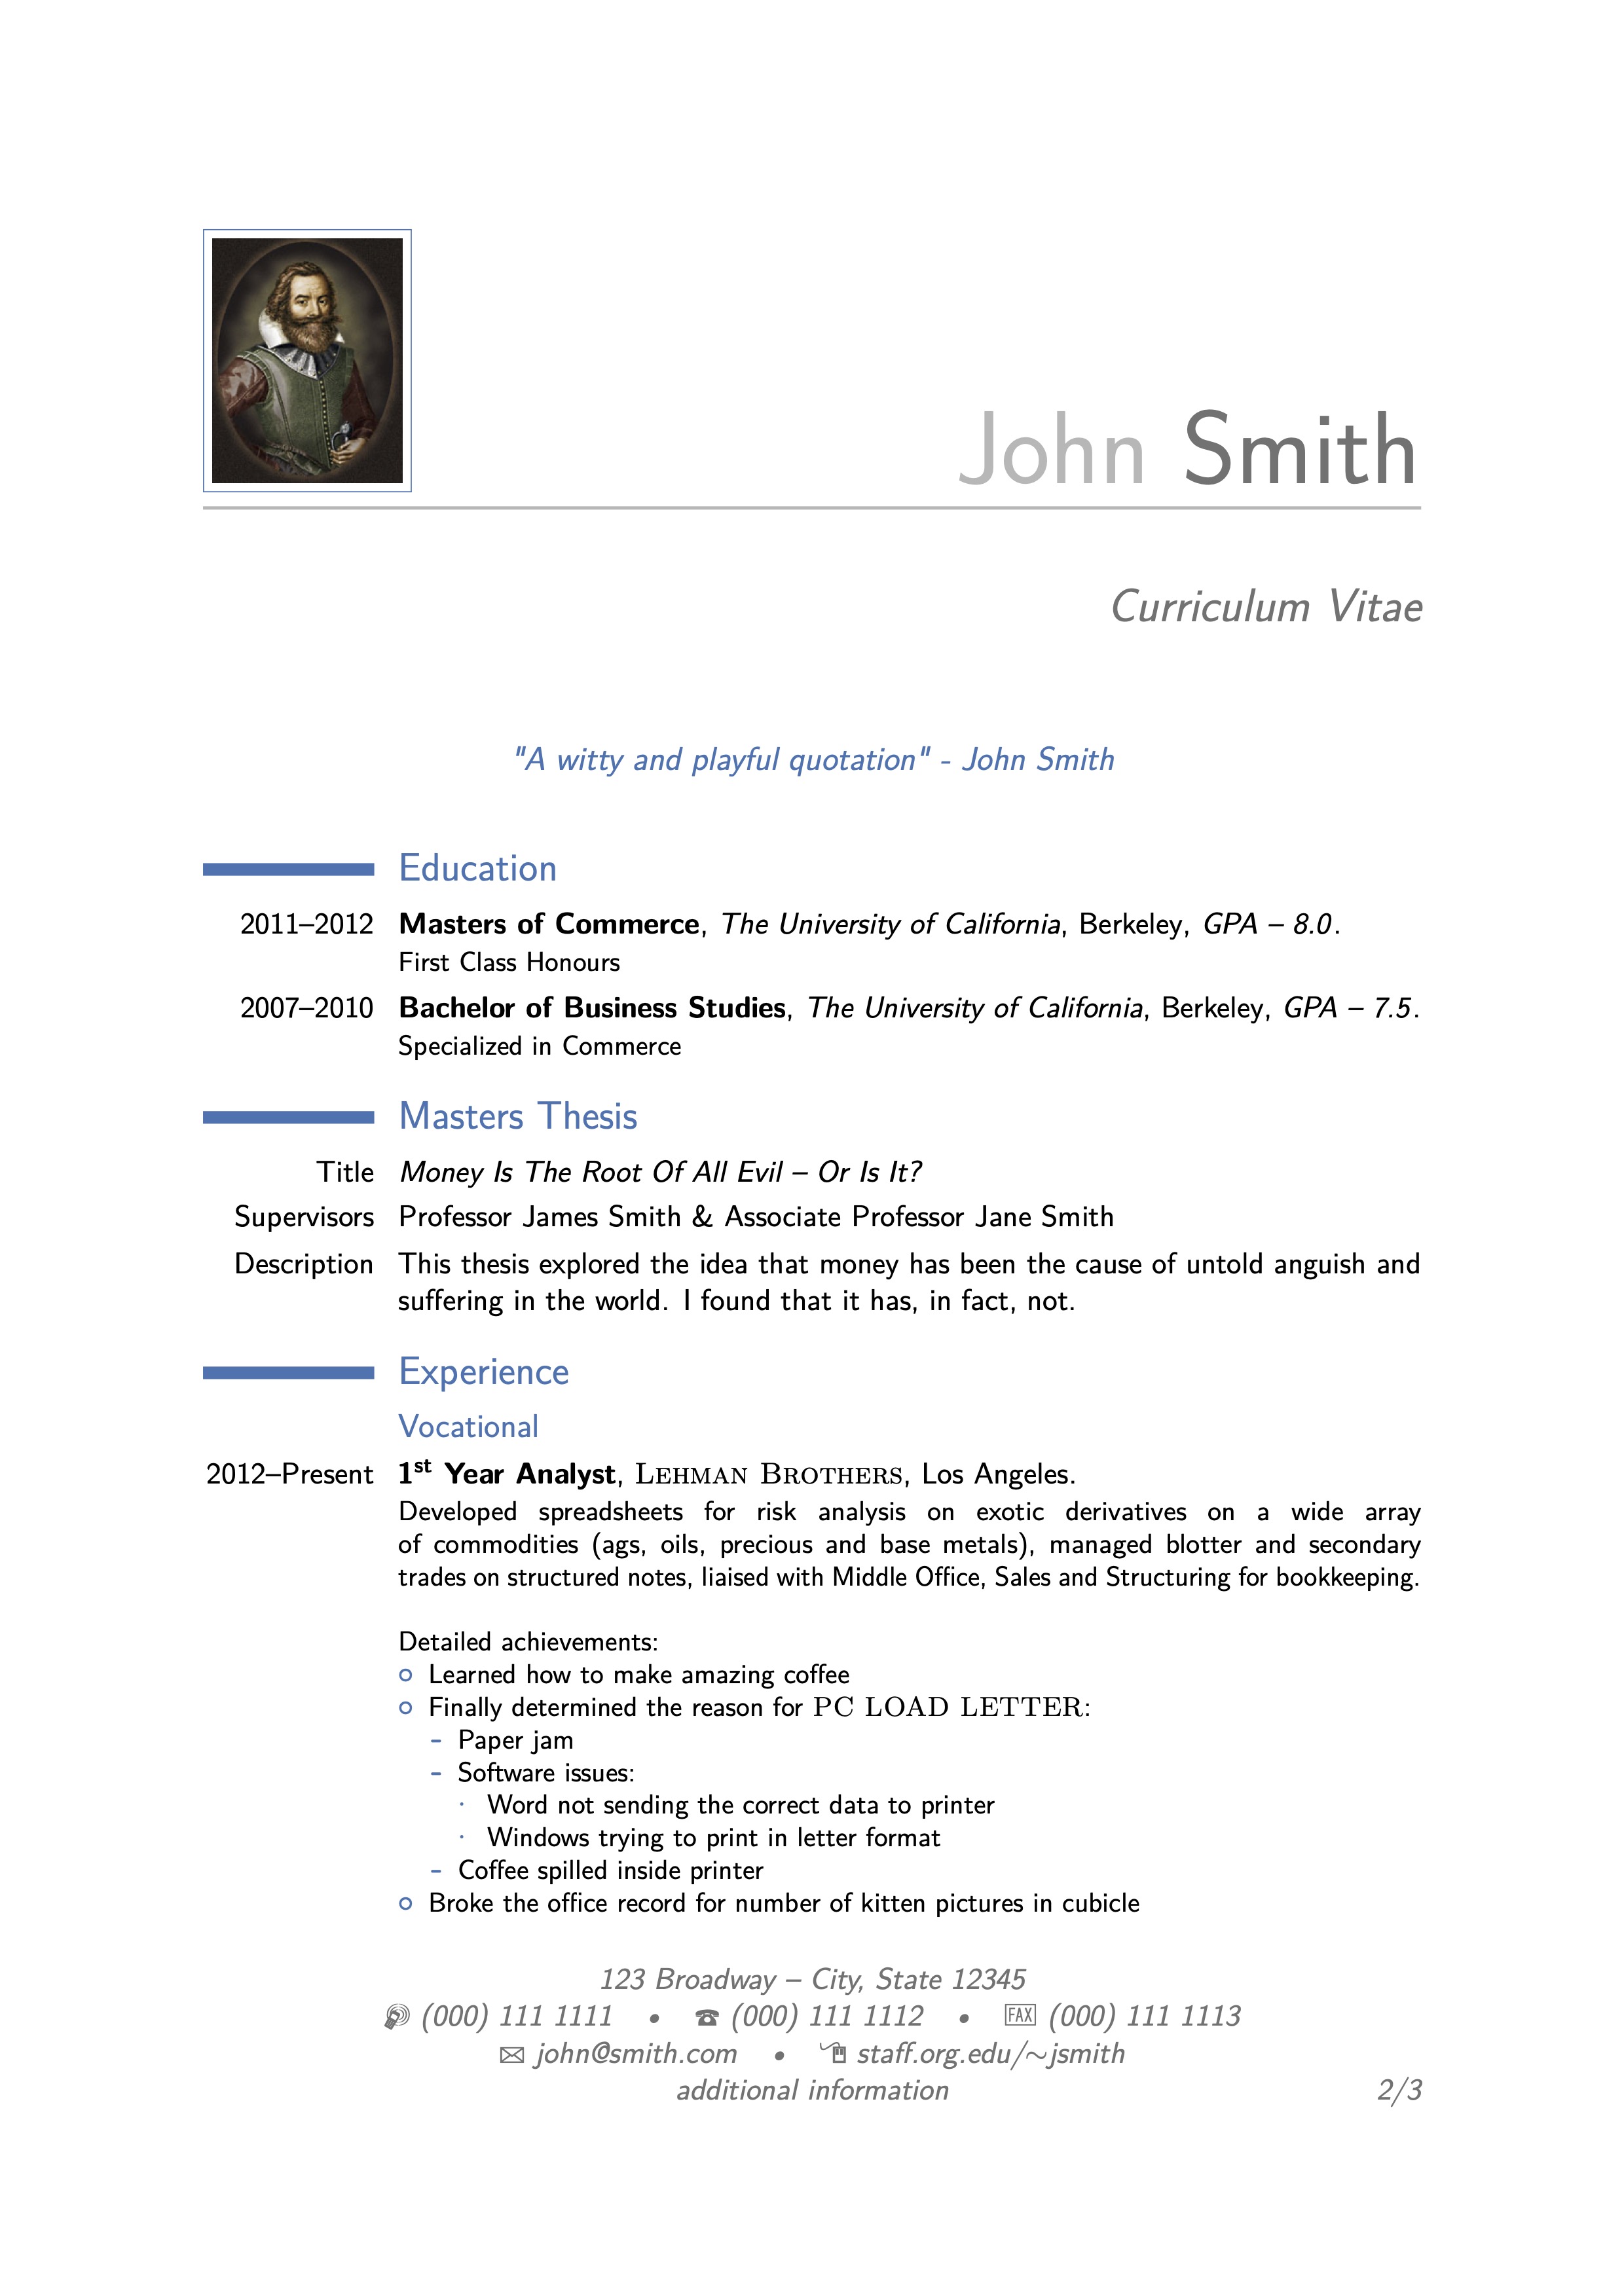 LaTeX Templates - ModernCV CV and Cover Letter Inside Fax Template Word 2010